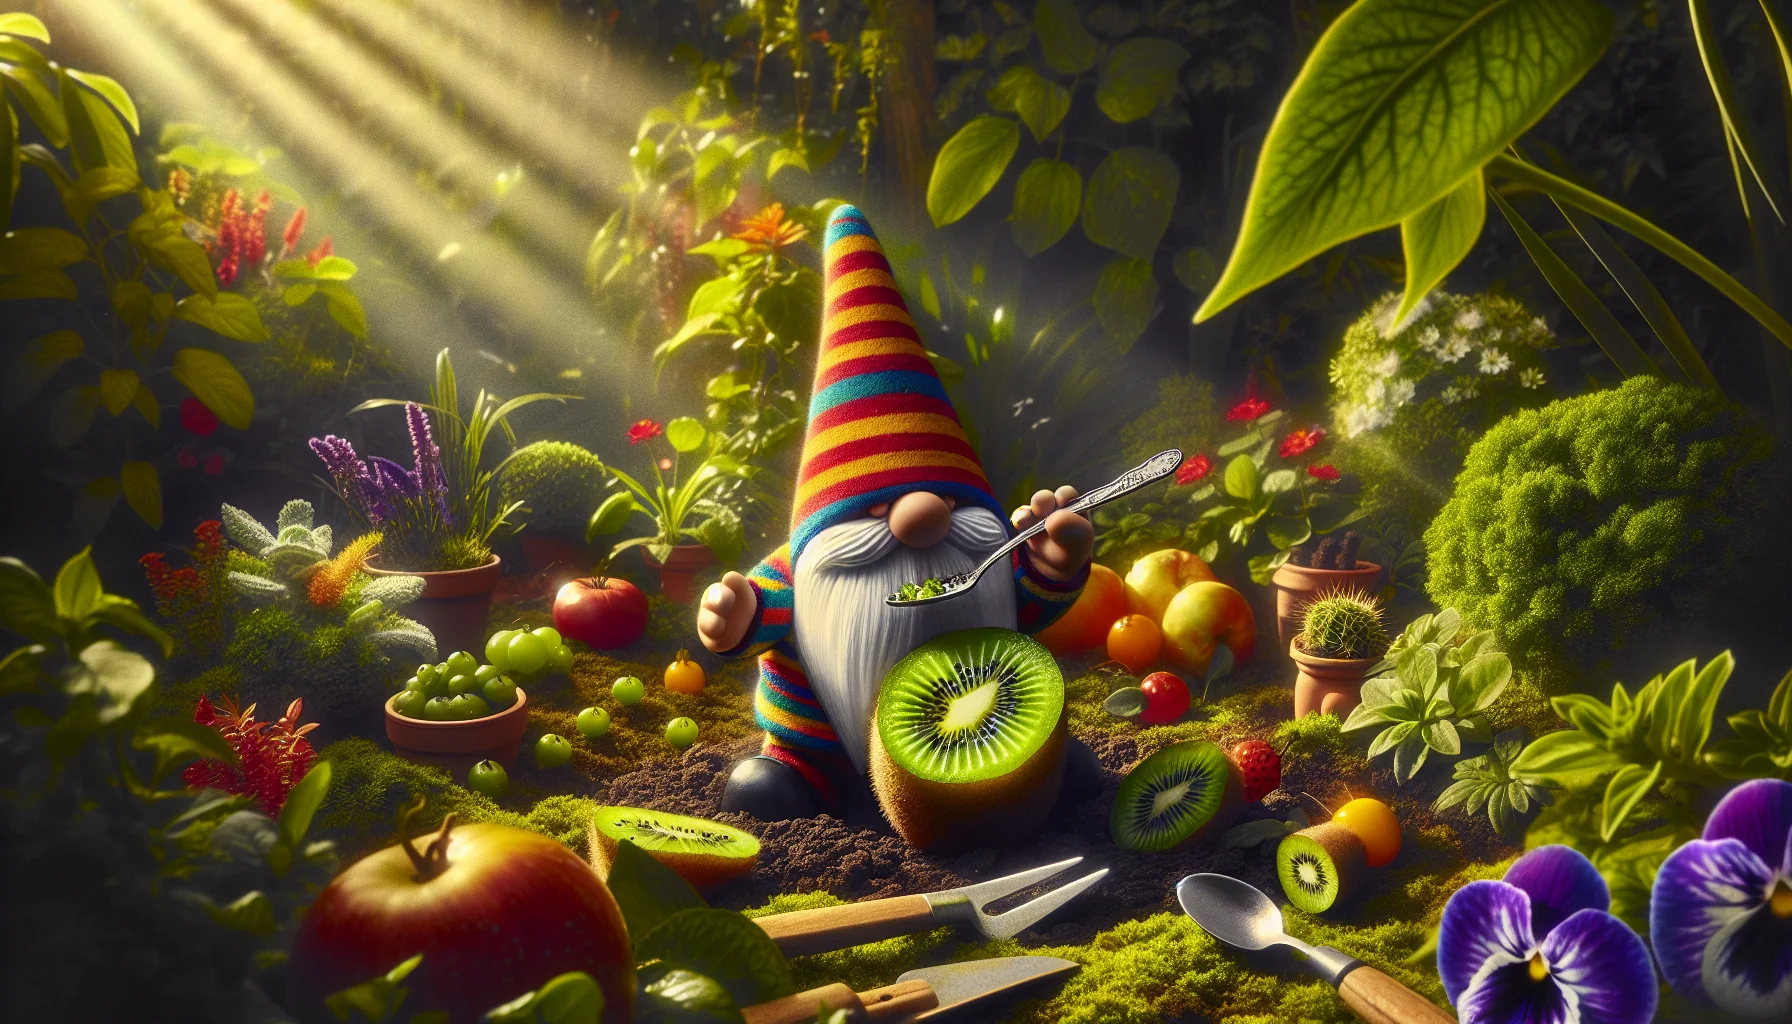 Create a humorous and engaging image depicting a garden scenario. In the center, a colorful and striped garden gnome with a long white beard is attempting to eat a kiwi fruit with a small silver spoon, showcasing the proper way to enjoy this healthy snack. He is surrounded by lush, varied vegetation with patches of vibrant fruits and vegetables. Sunlight pours down, creating a warm, inviting scene. Garden tools are scattered around the gnome, implying he took a playful break from gardening. This scenario aims to promote the joy of gardening and fruit consumption.